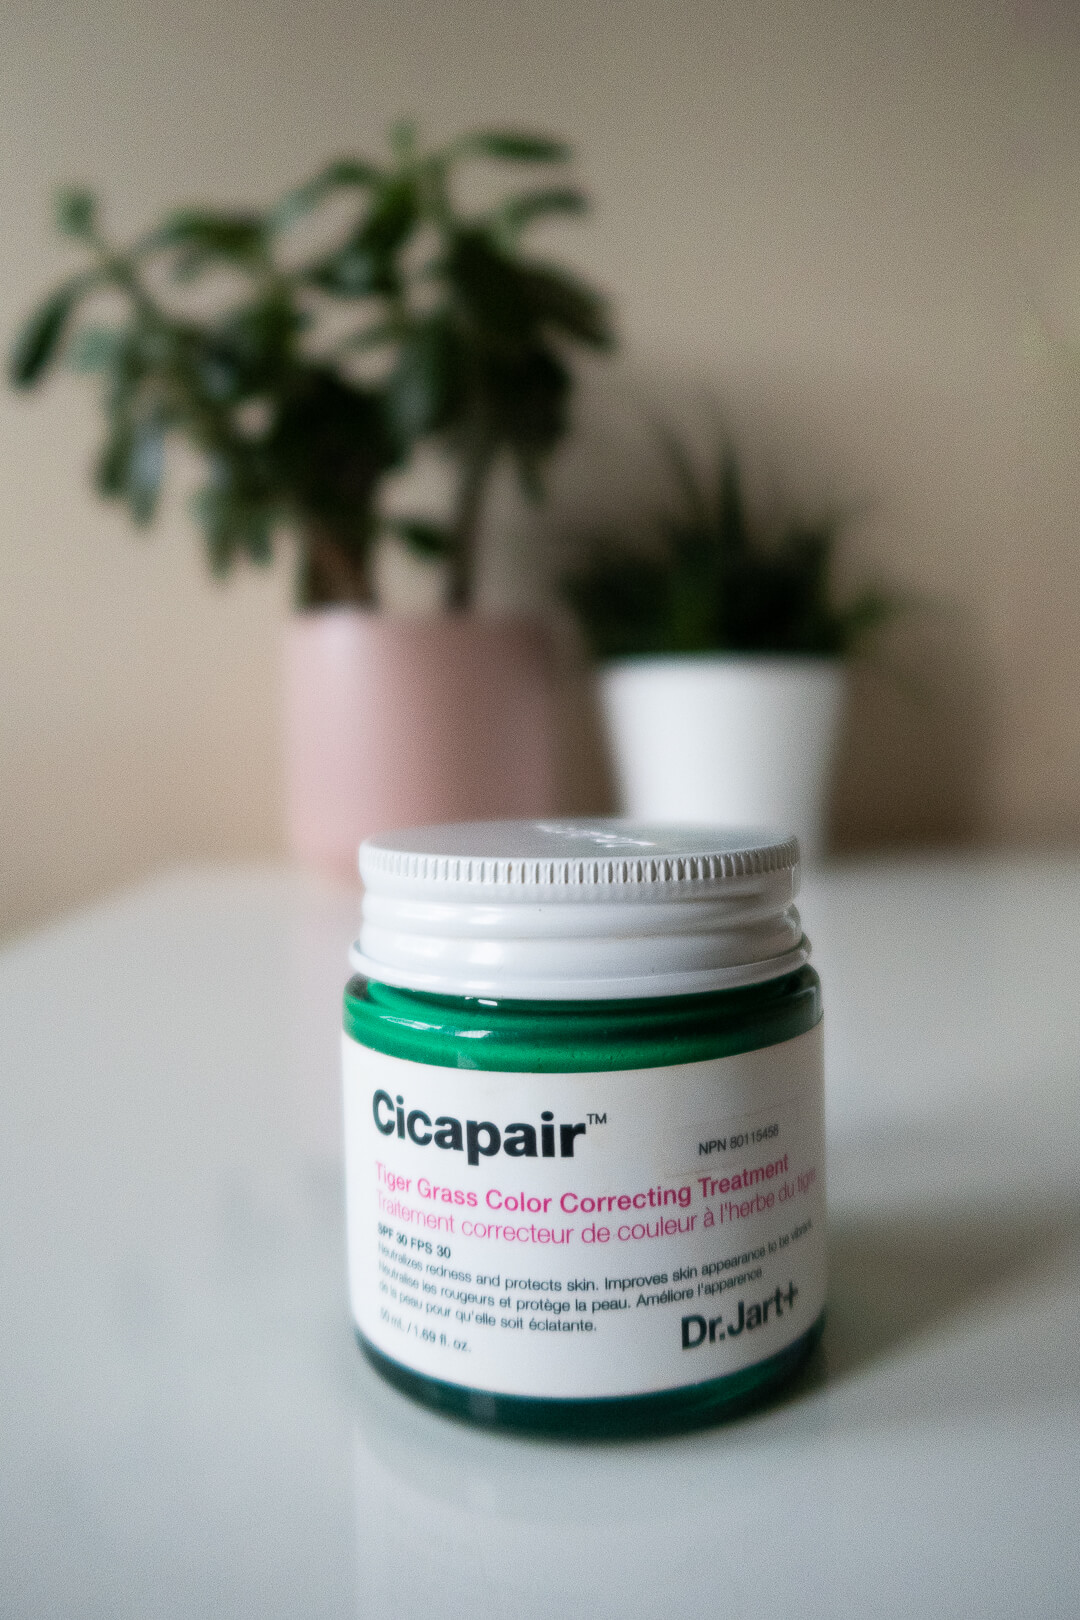 Dr. Jart Cicapair Color Correcting Cream Review